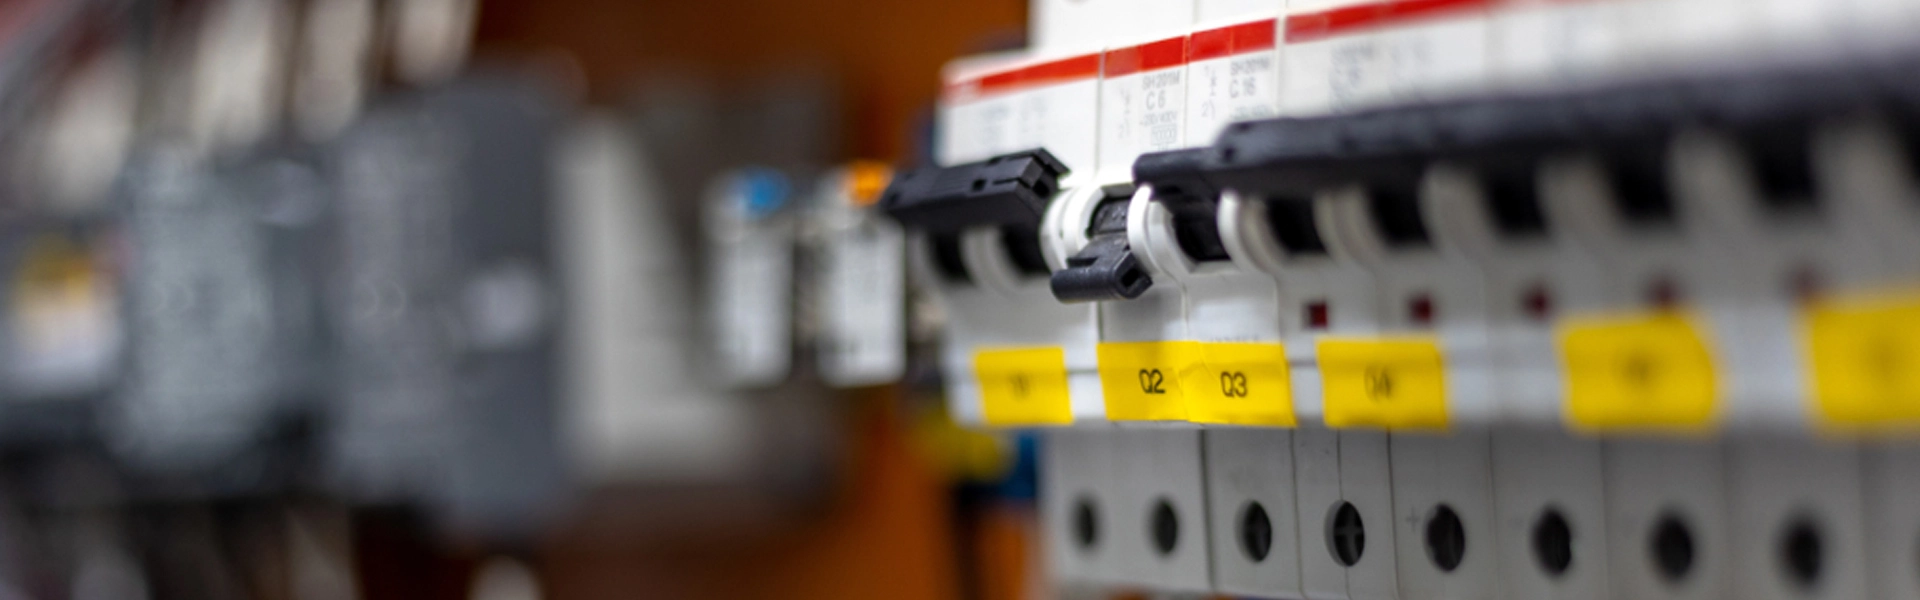 Electrical Circuit Breaker Solutions in Construction